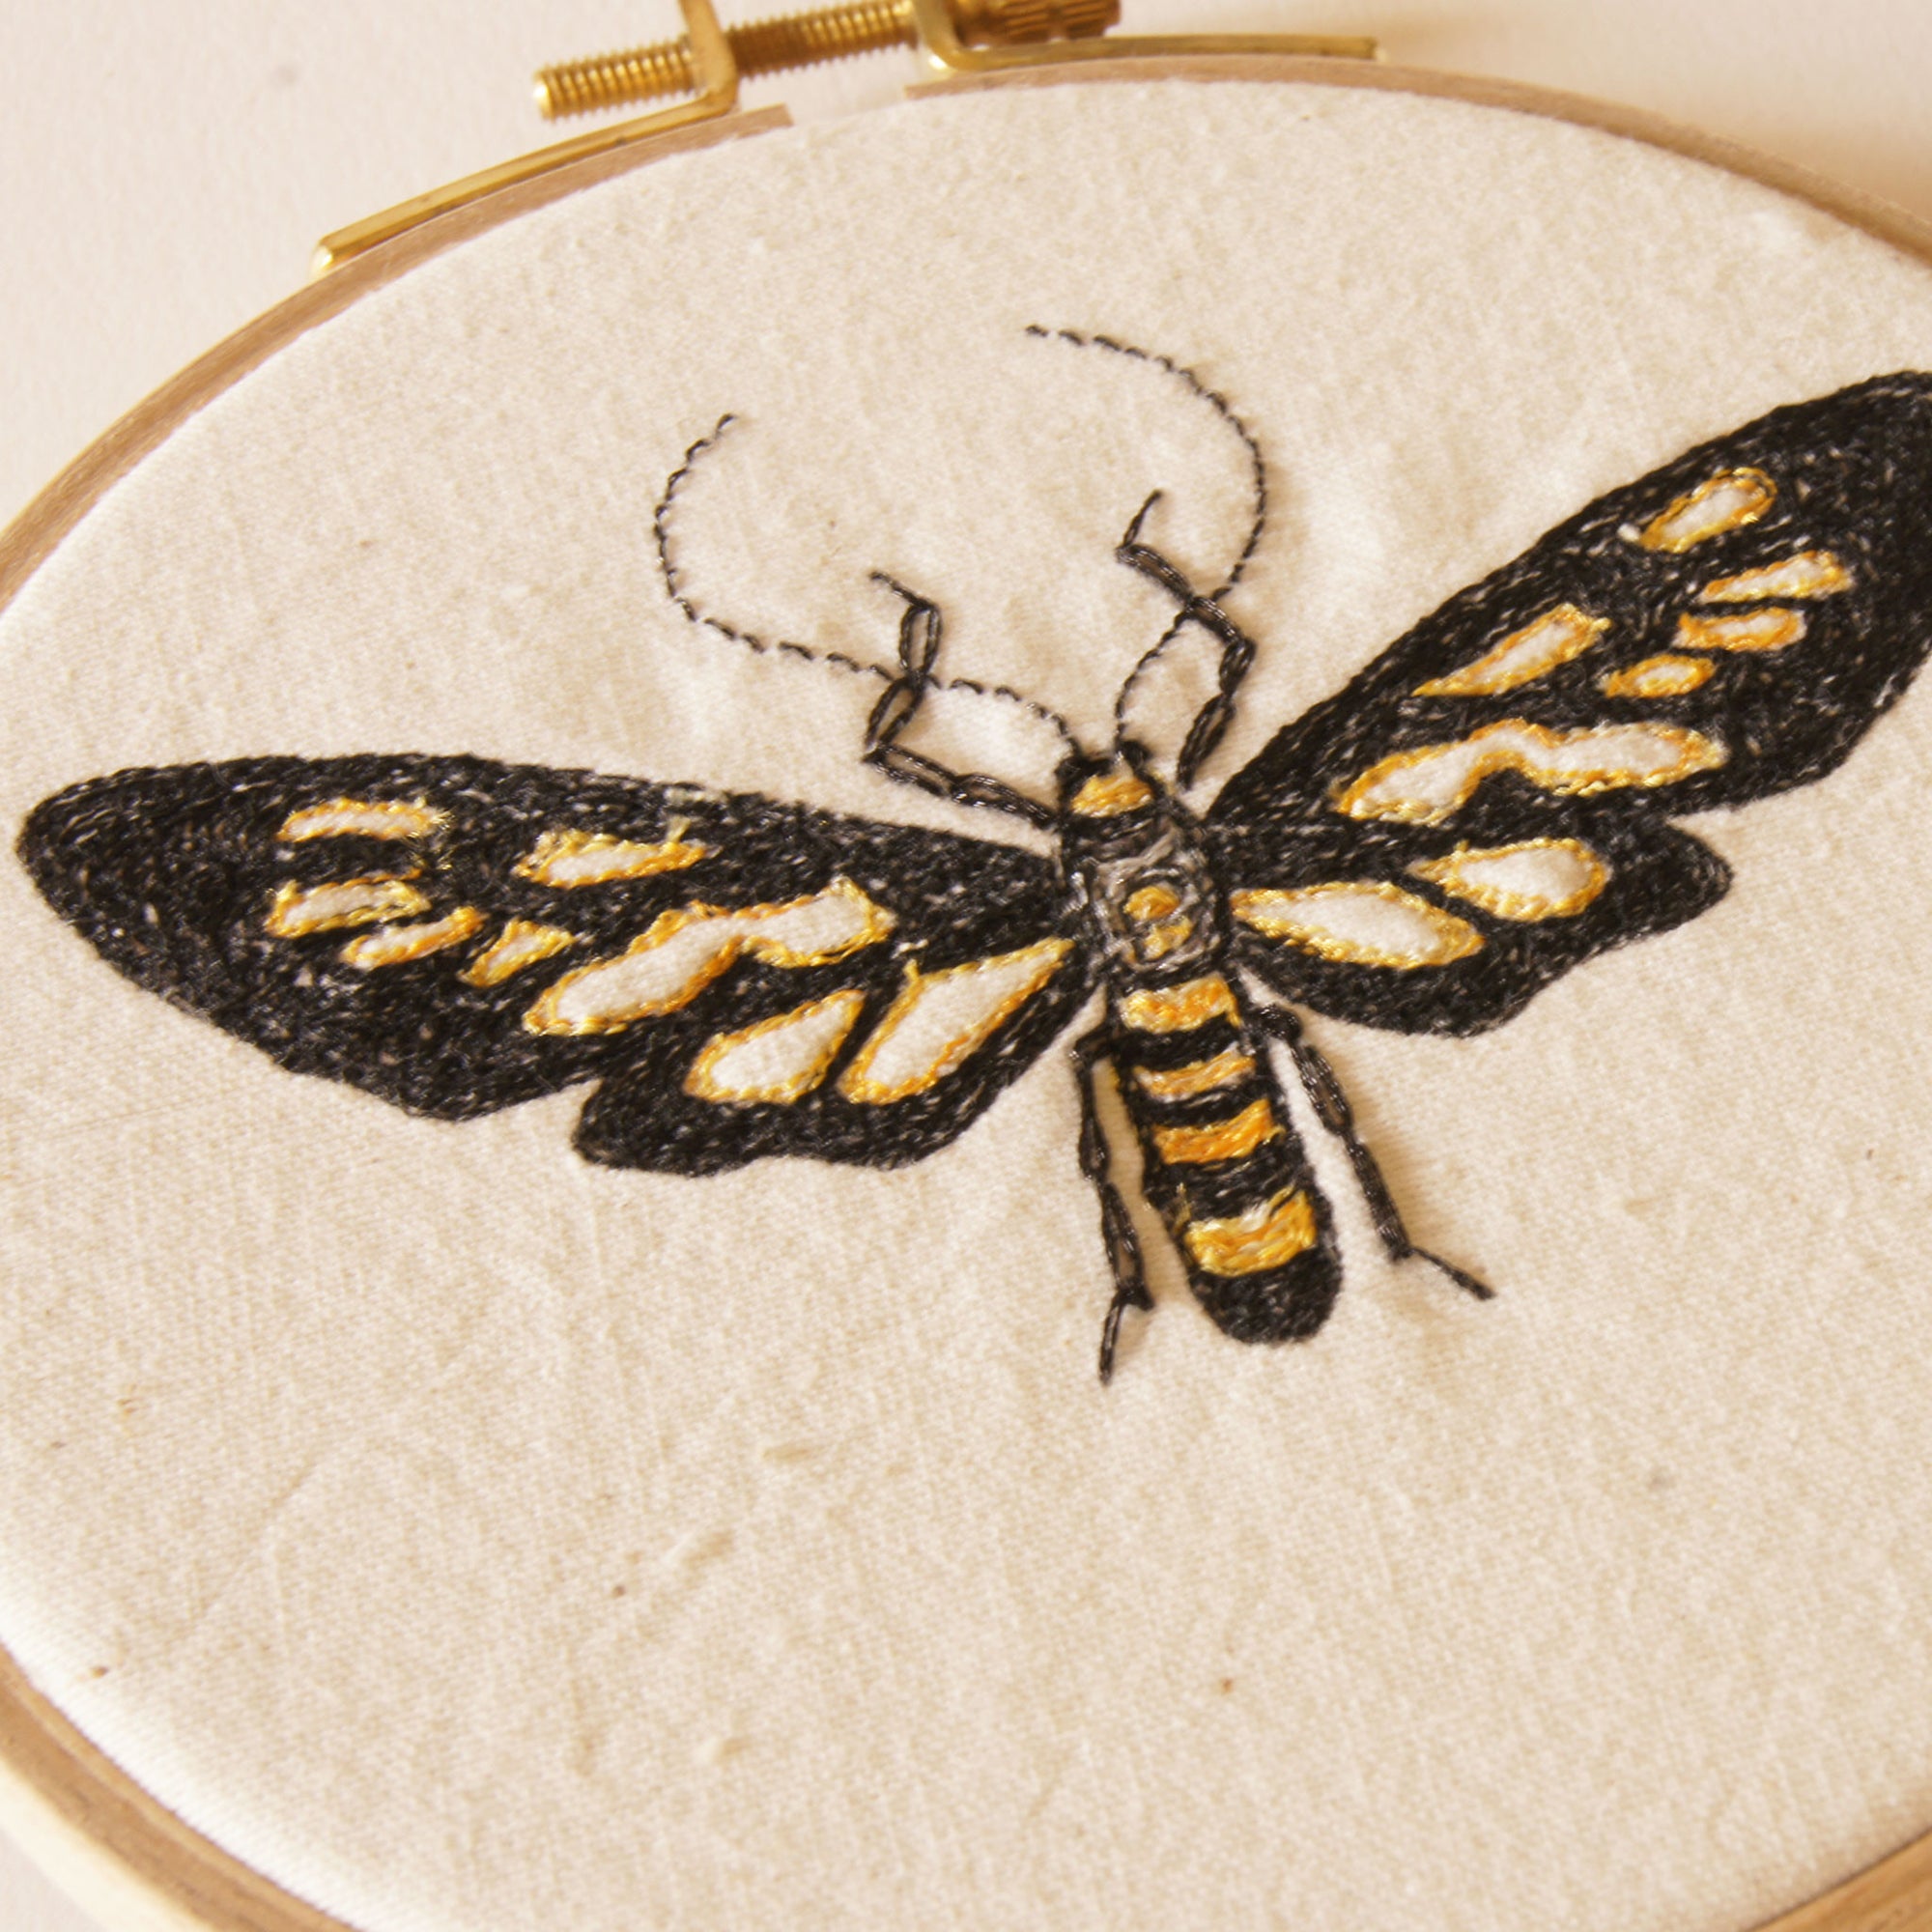 Embroidered Hoop Art Clearwing Tiger Moth Entomology Home Decor